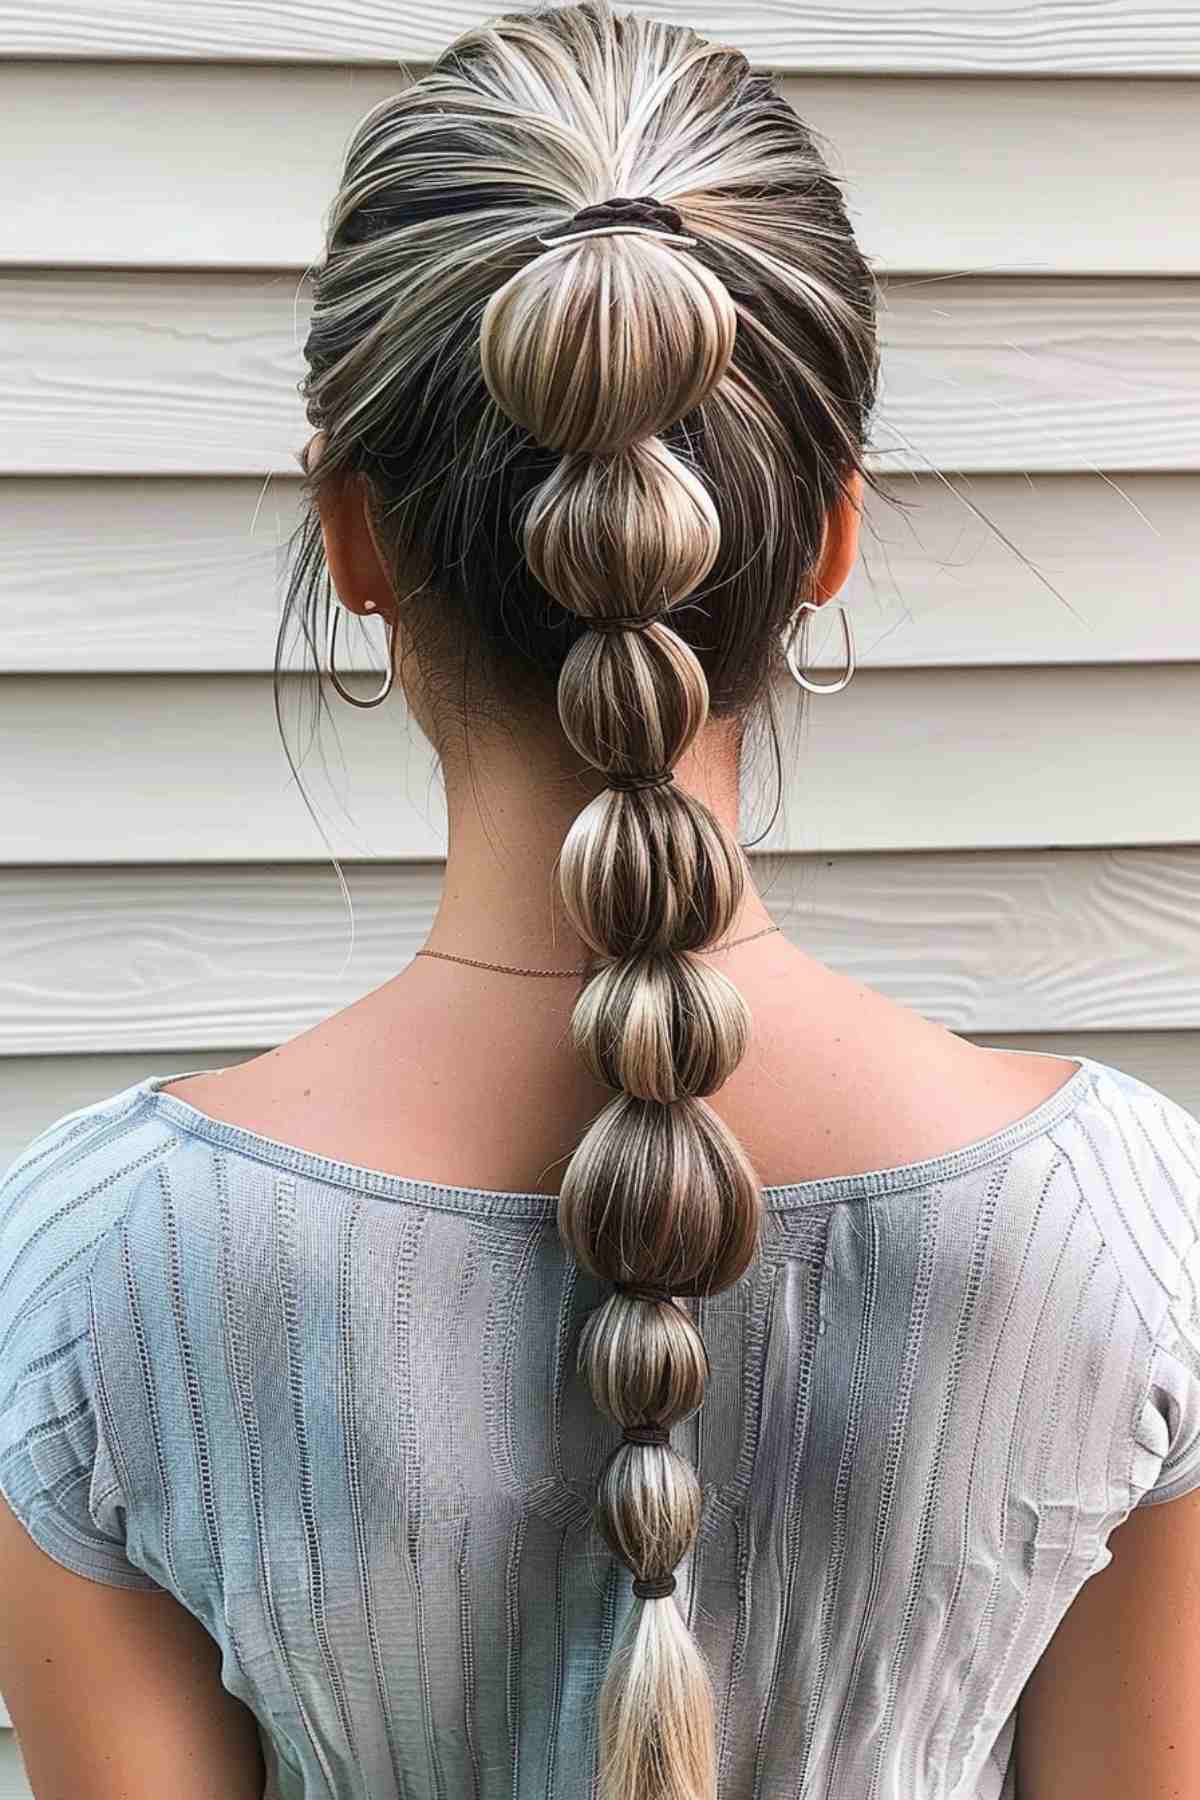 A casual and quick bubble braid hairstyle suited for everyday charm and ease.